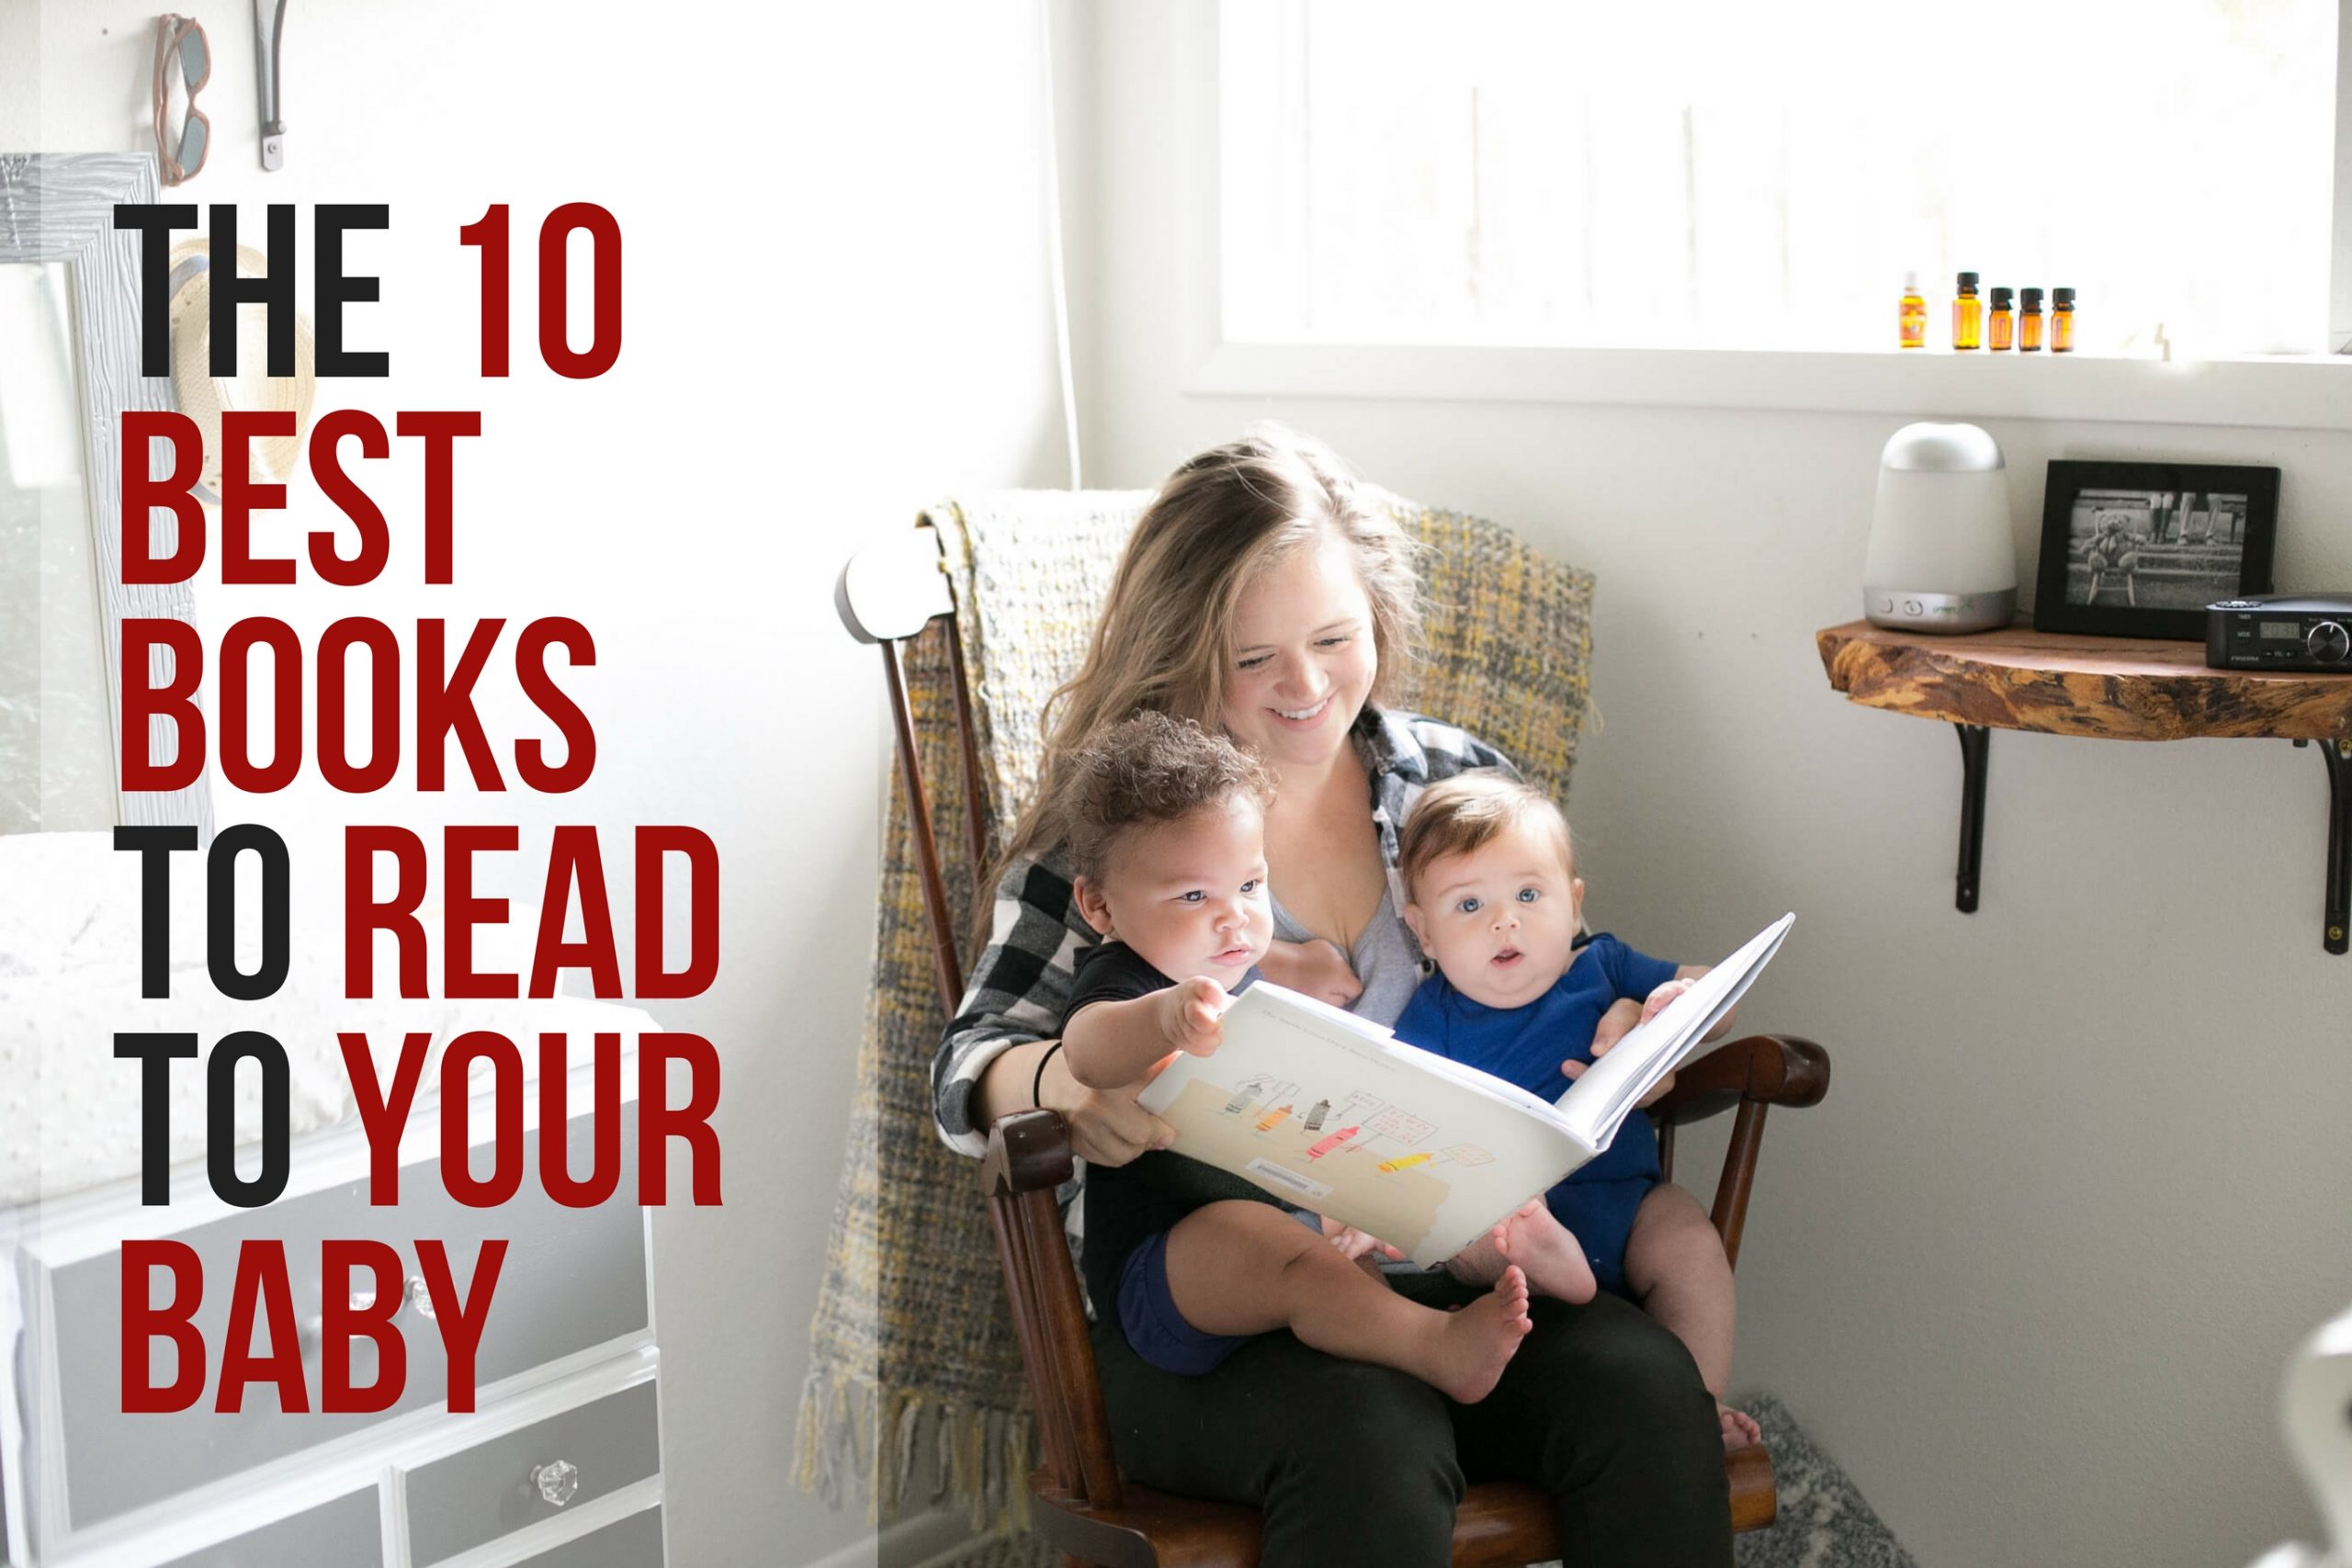 The 10 Best Books to Read to Your Baby